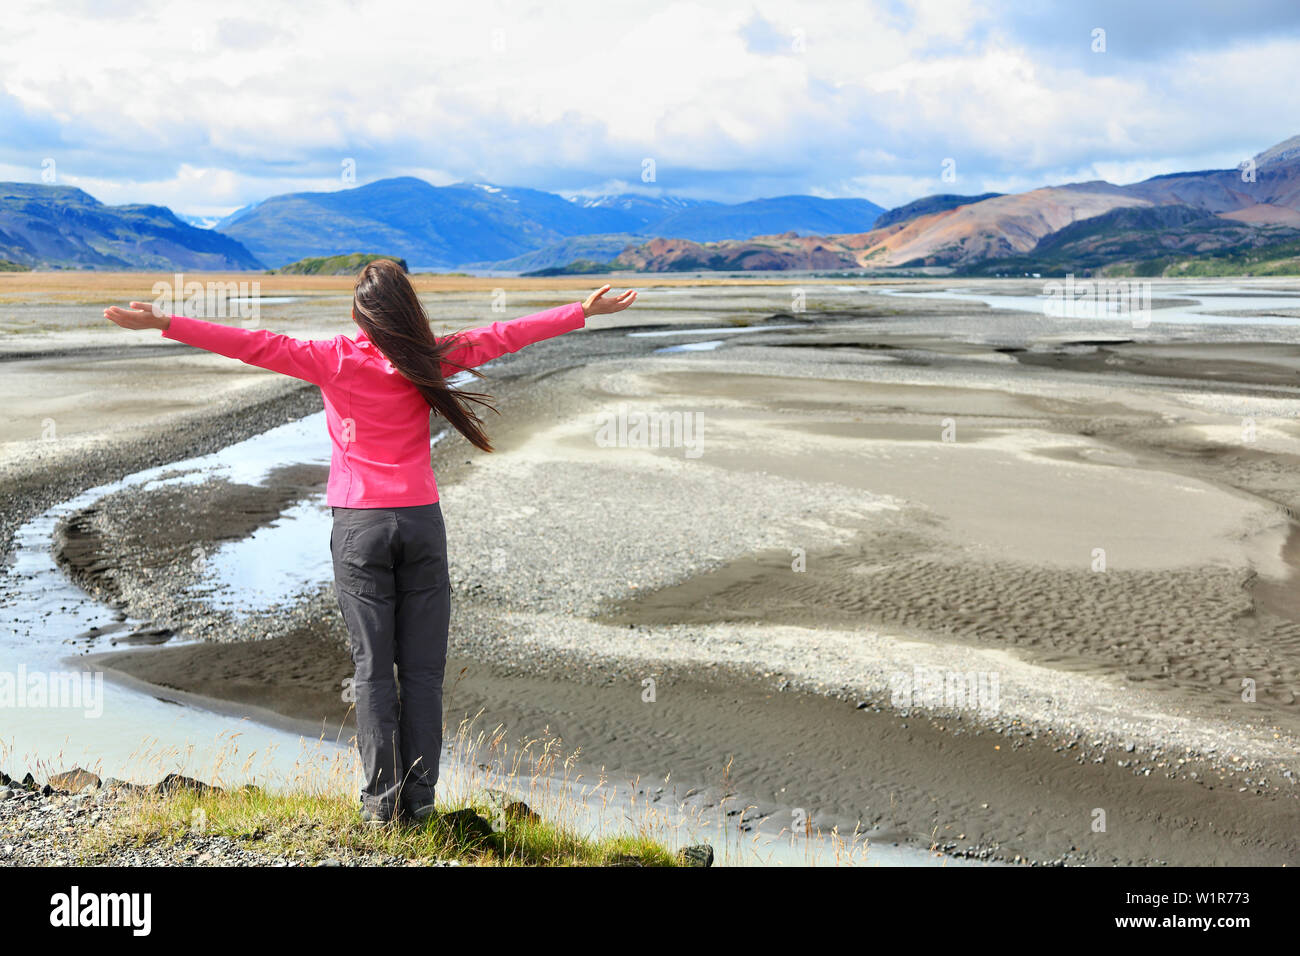 Woman enjoying view of Iceland black sand dunes in south Icelandic nature landscape. Serene person relaxing soaking in the natural beauty. Tourist visiting landmarks tourists attractions. Stock Photo